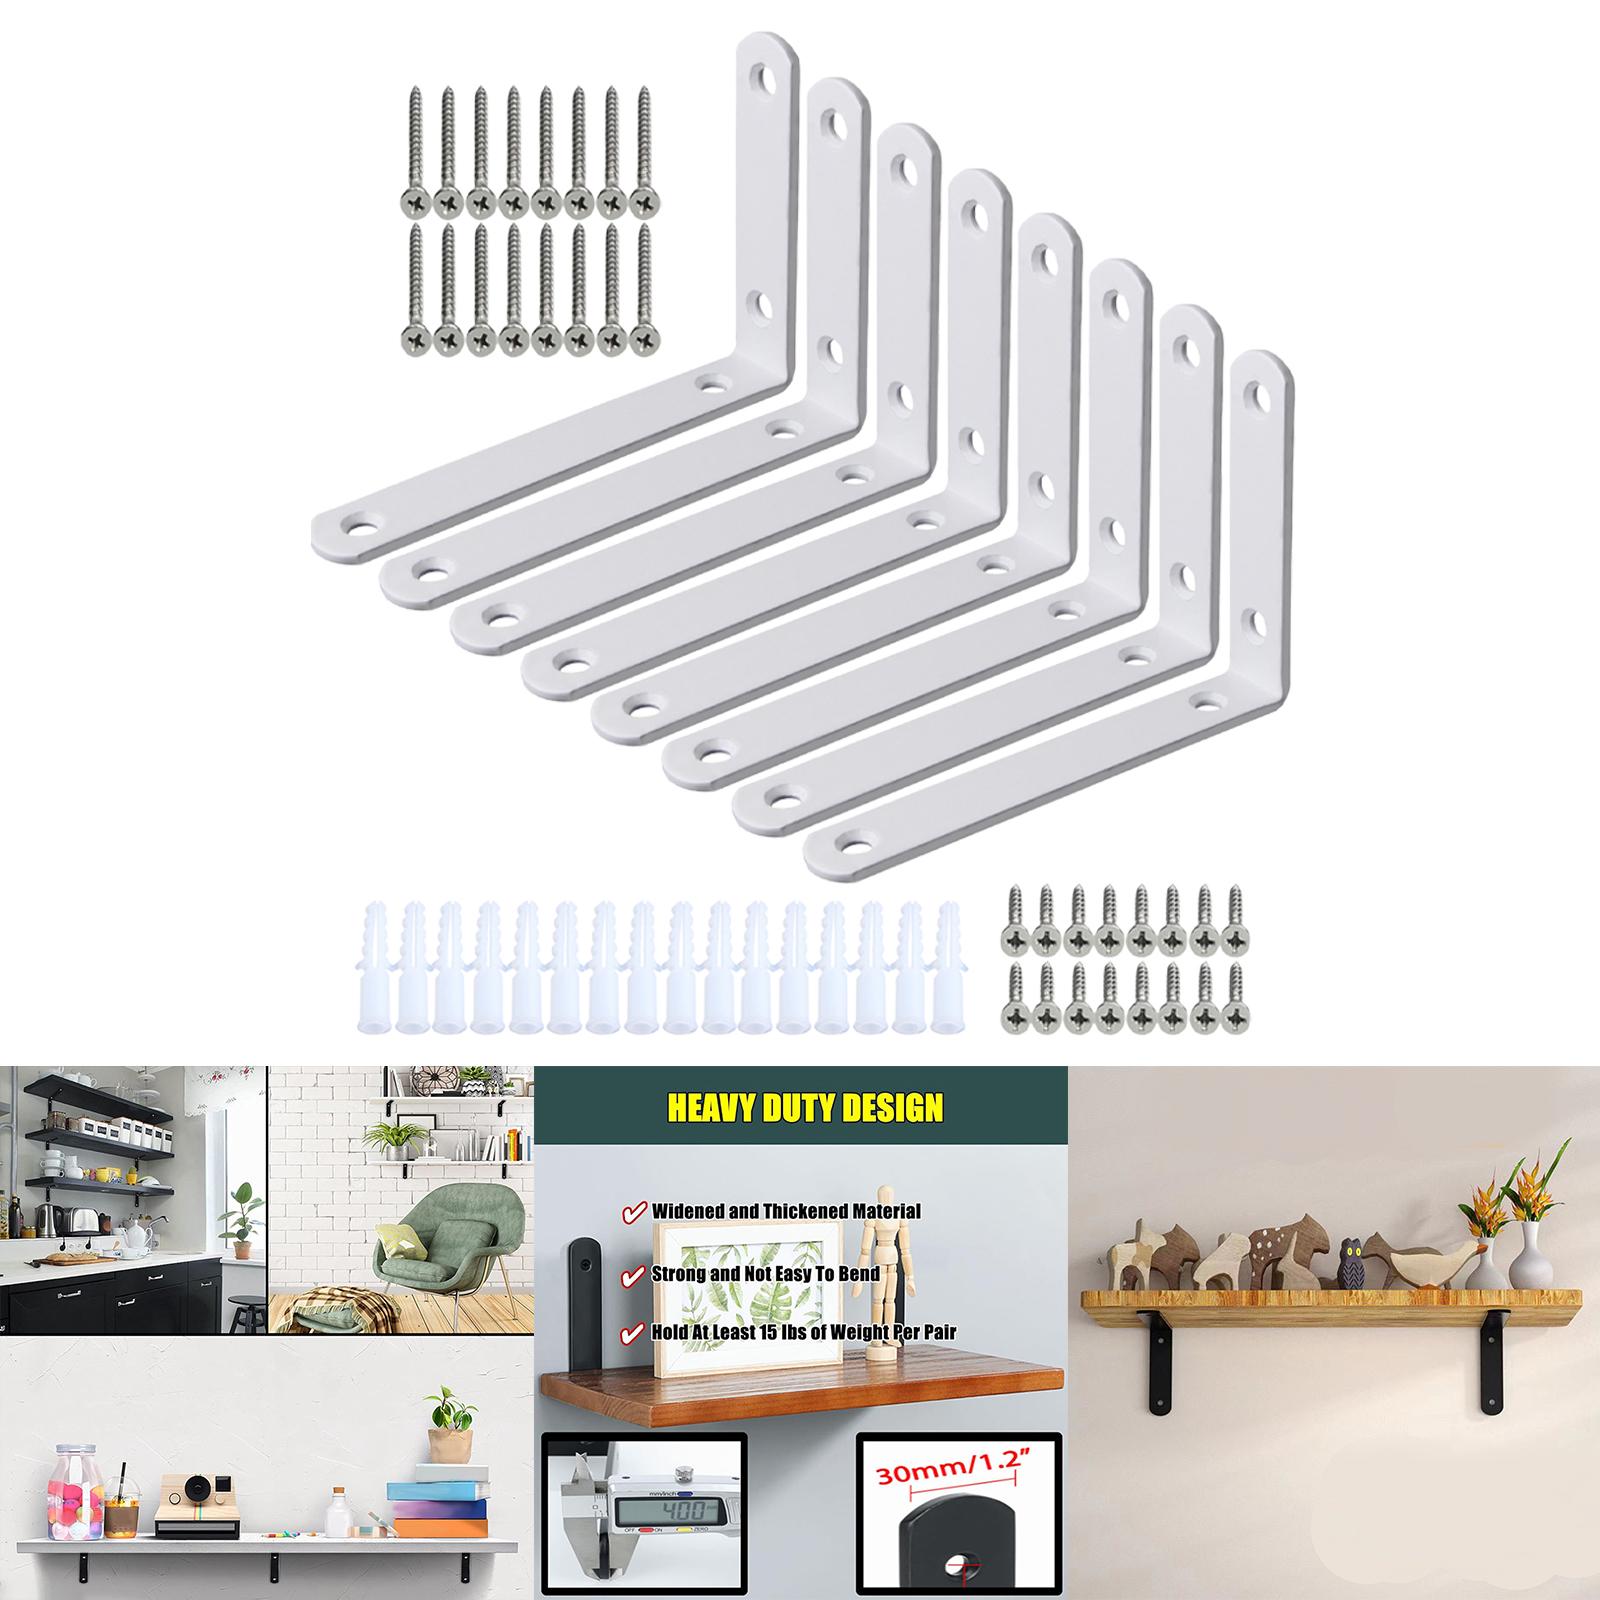 8 Pieces Corner Brace Wall Hanging Brackets for Bathroom Laundry Room Closet White 123x80mm